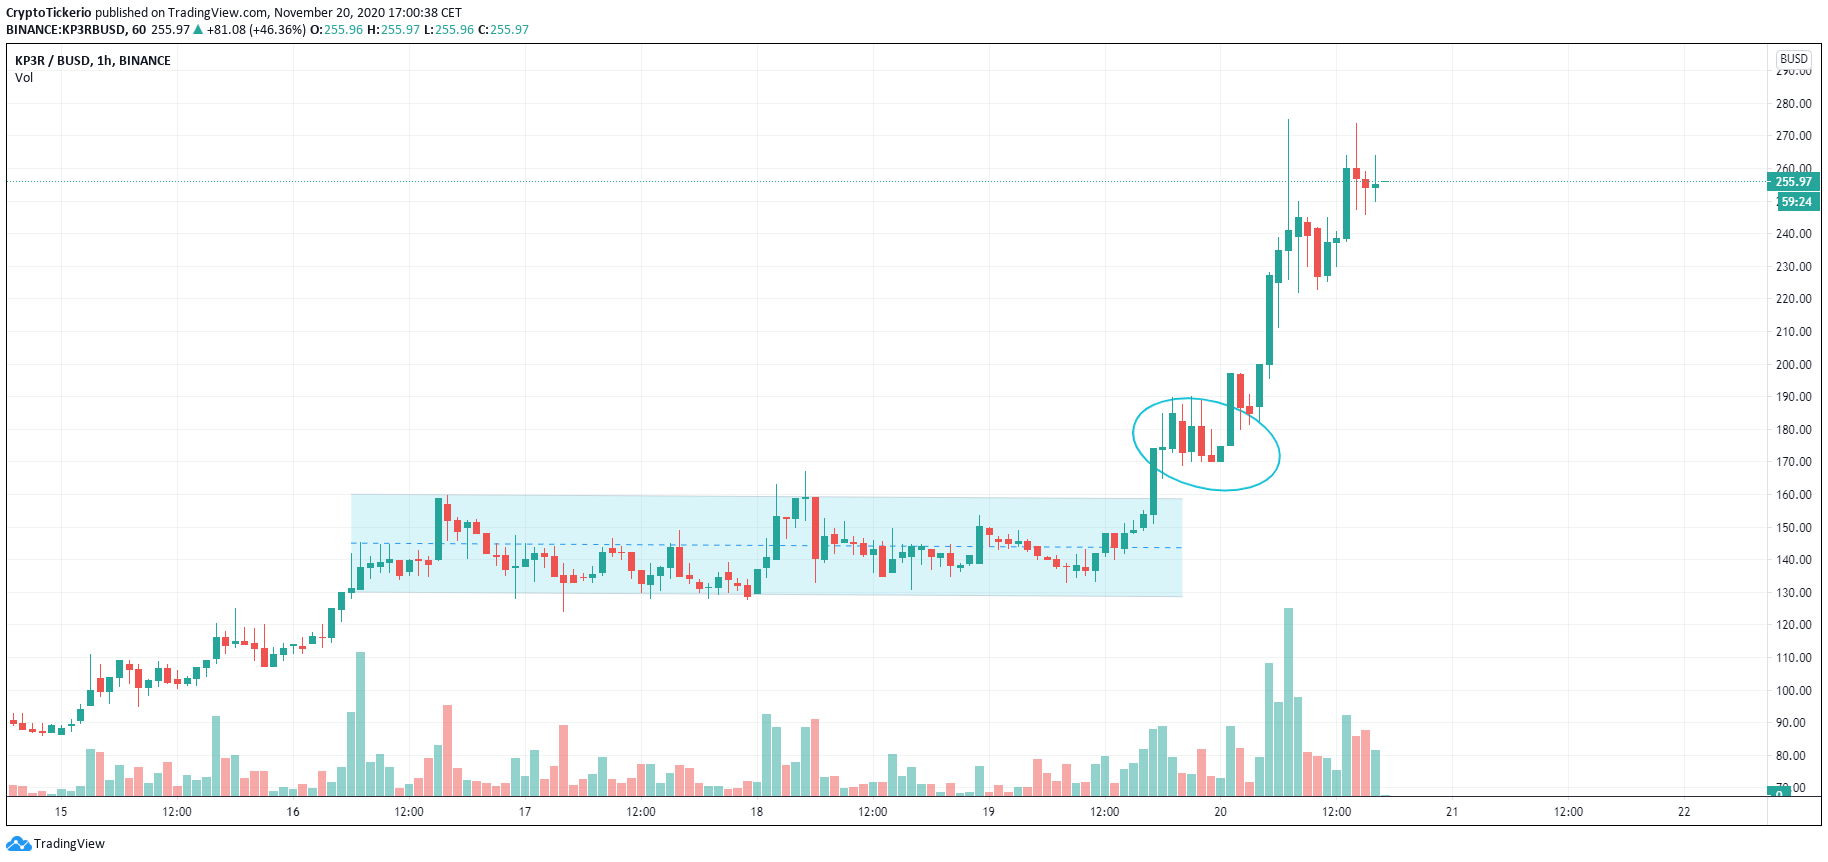 KP3R/BUSD 1-Hour chart – Price of Keep3rV1 through the roof within 24 hours 